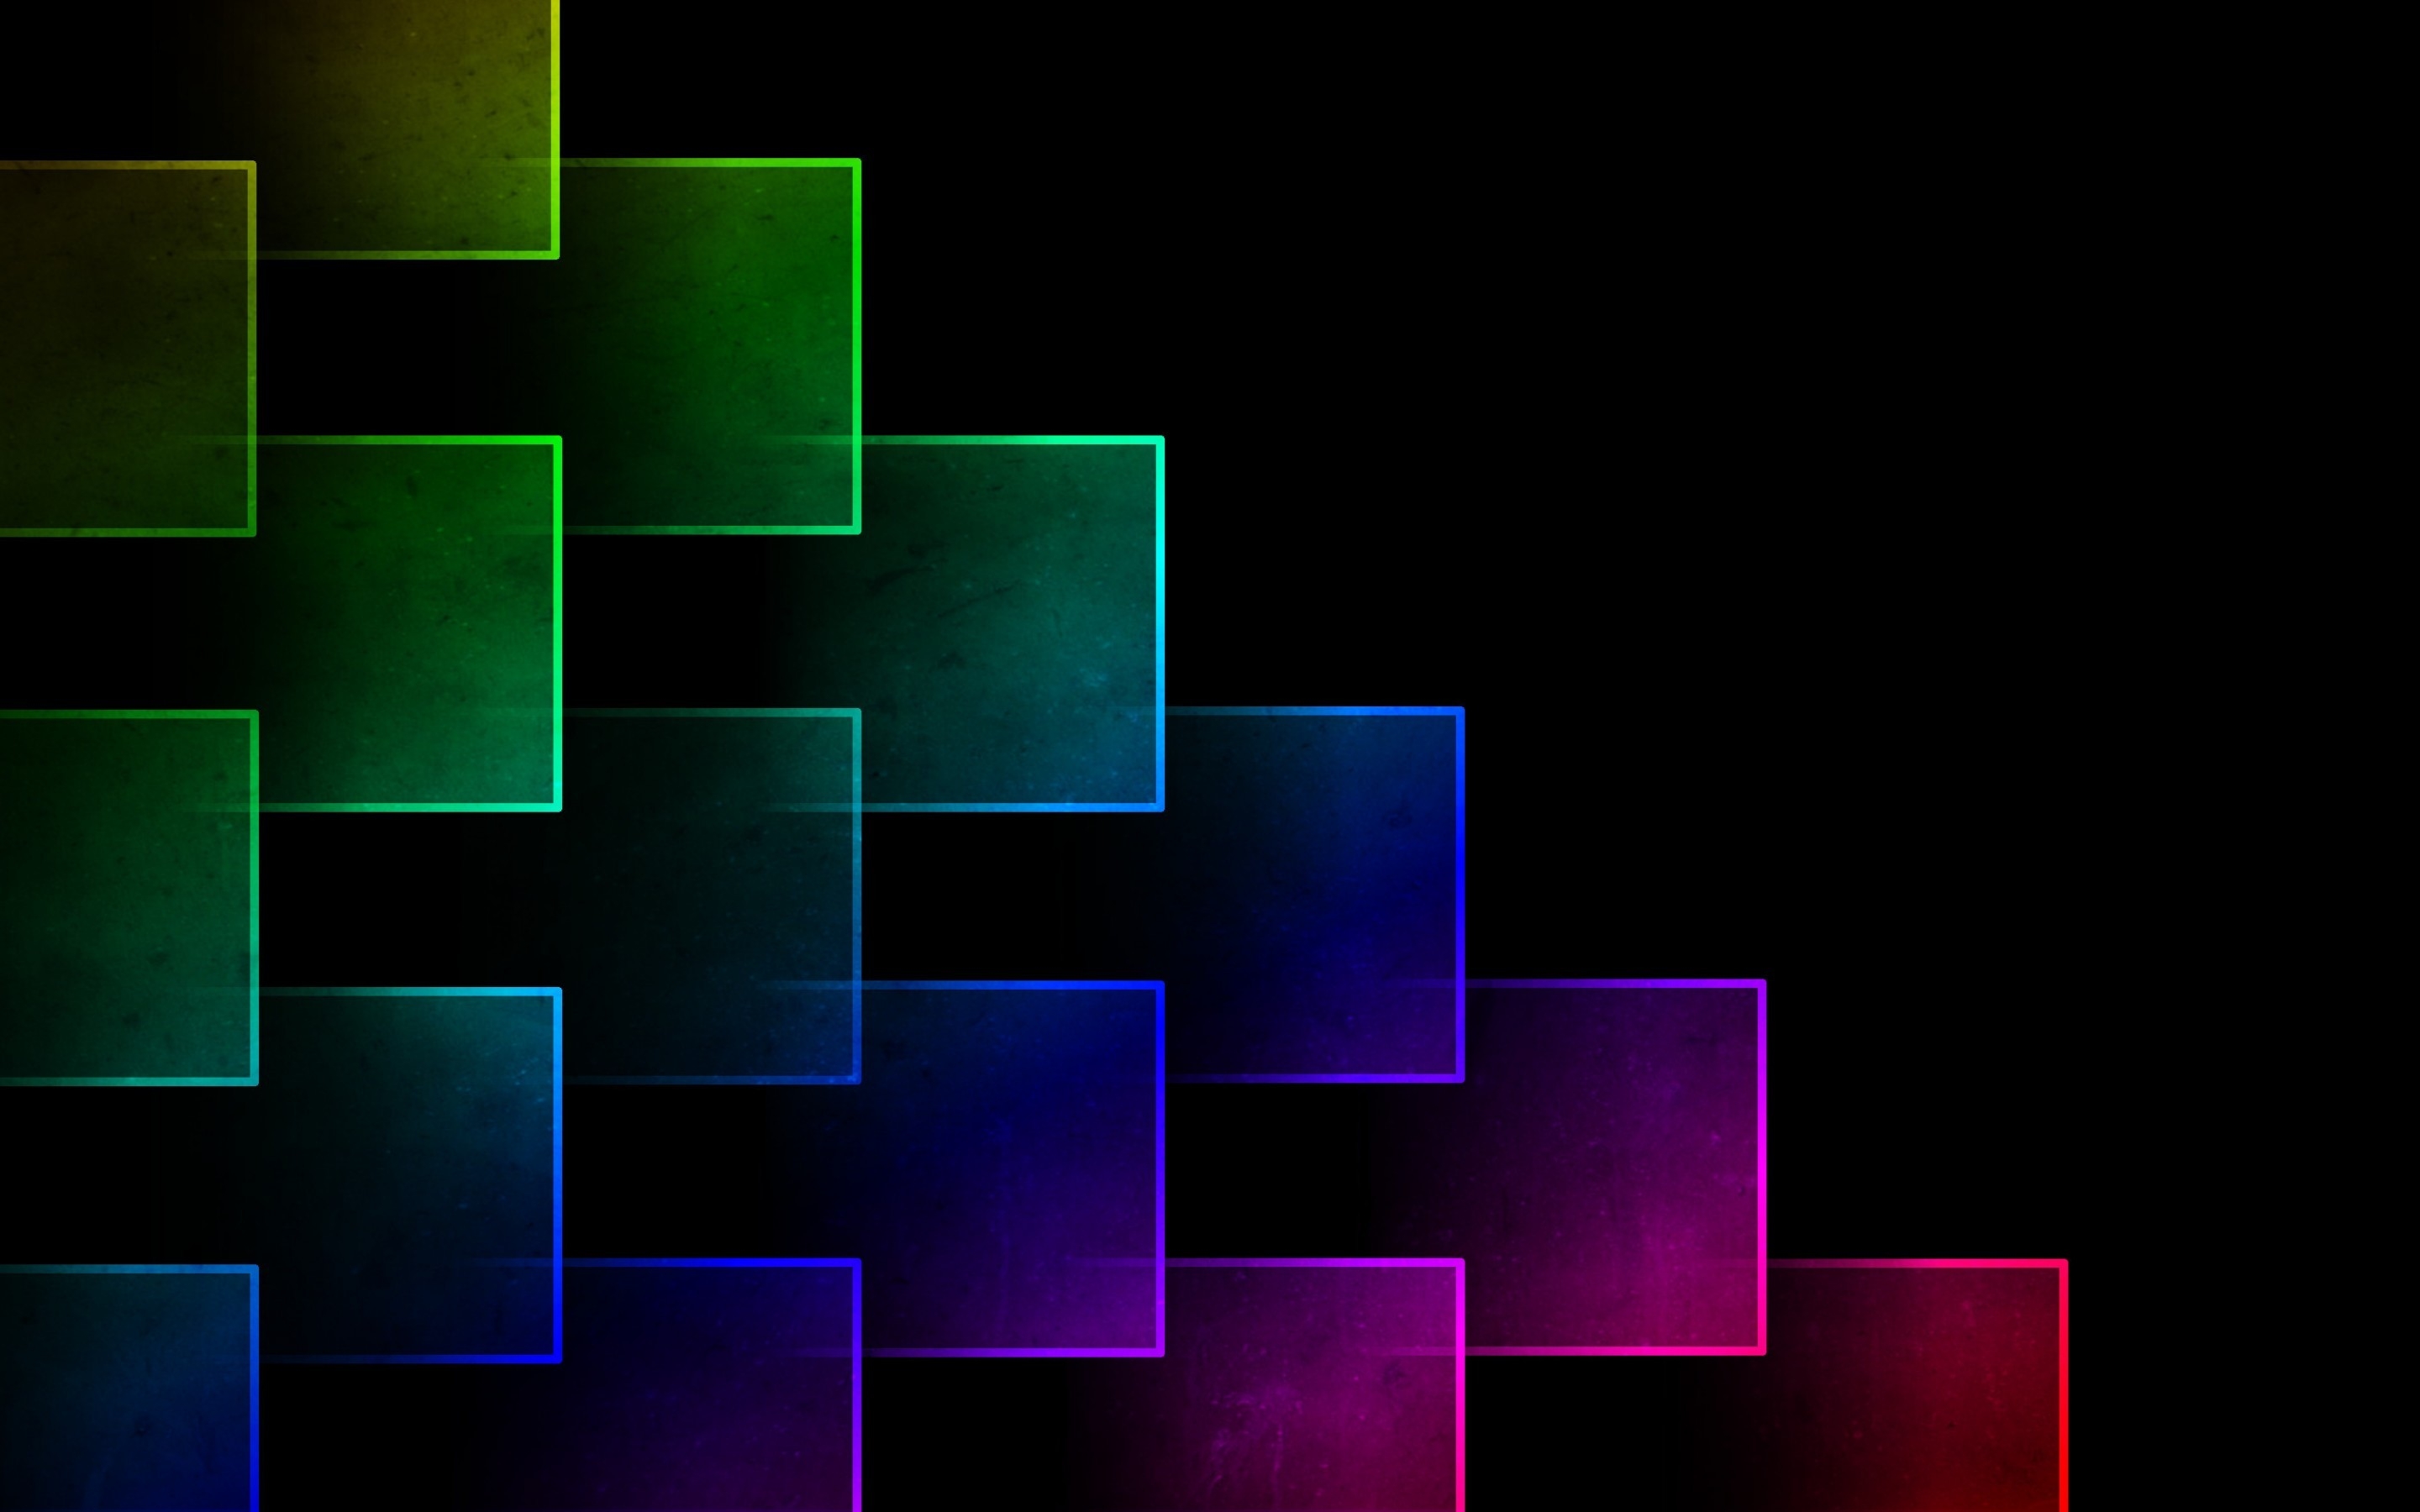 Colorful Cubes for 2880 x 1800 Retina Display resolution